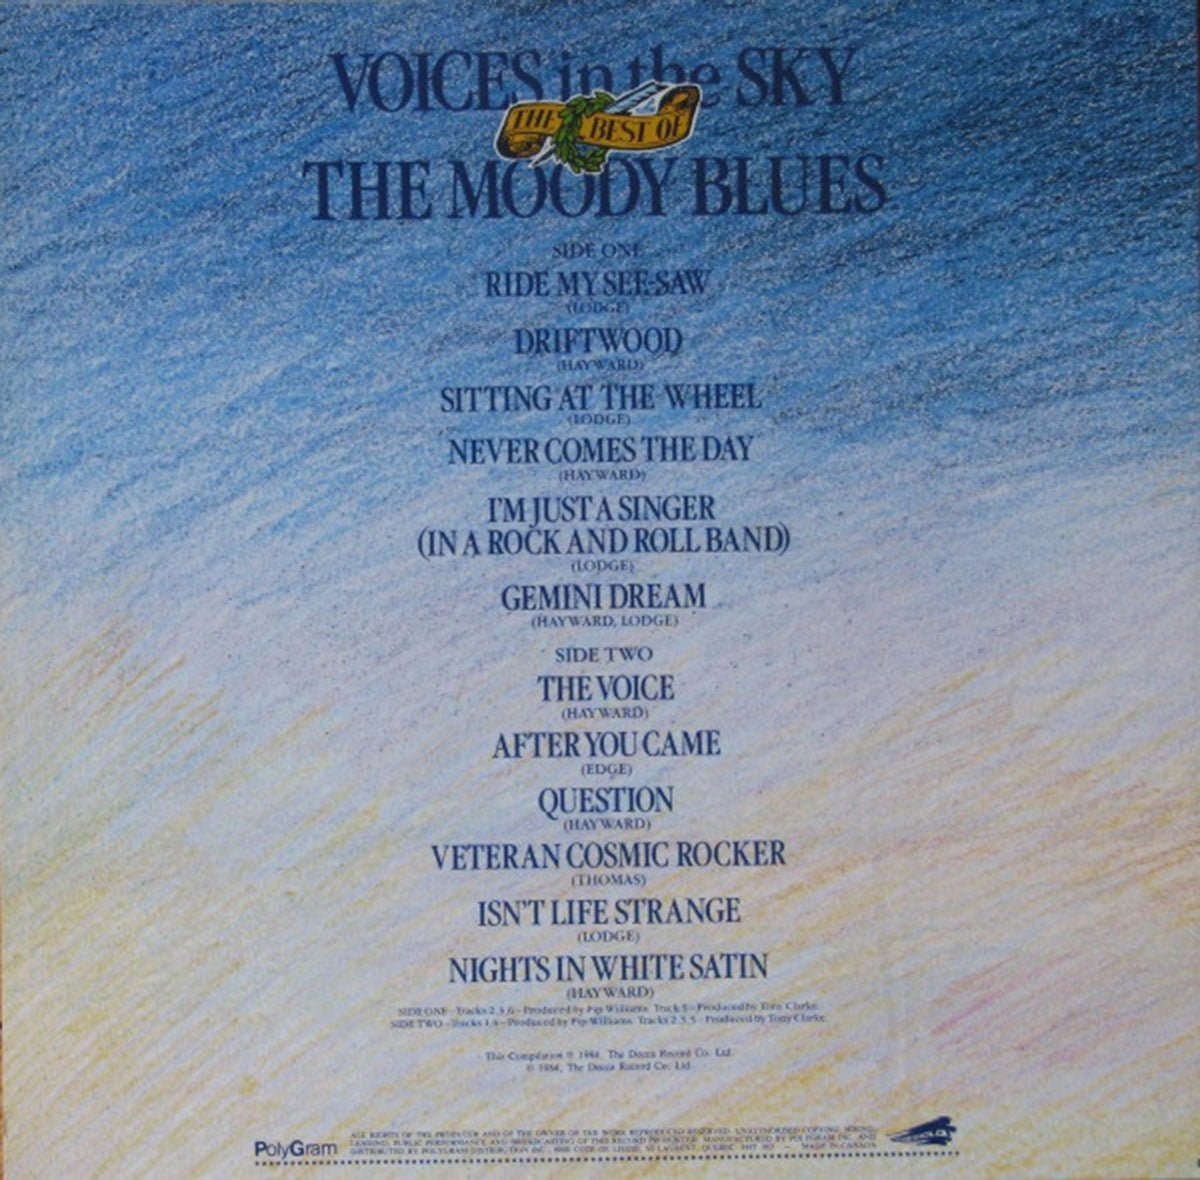 The Moody Blues – Voices In The Sky (The Best Of The Moody Blues) - 1984